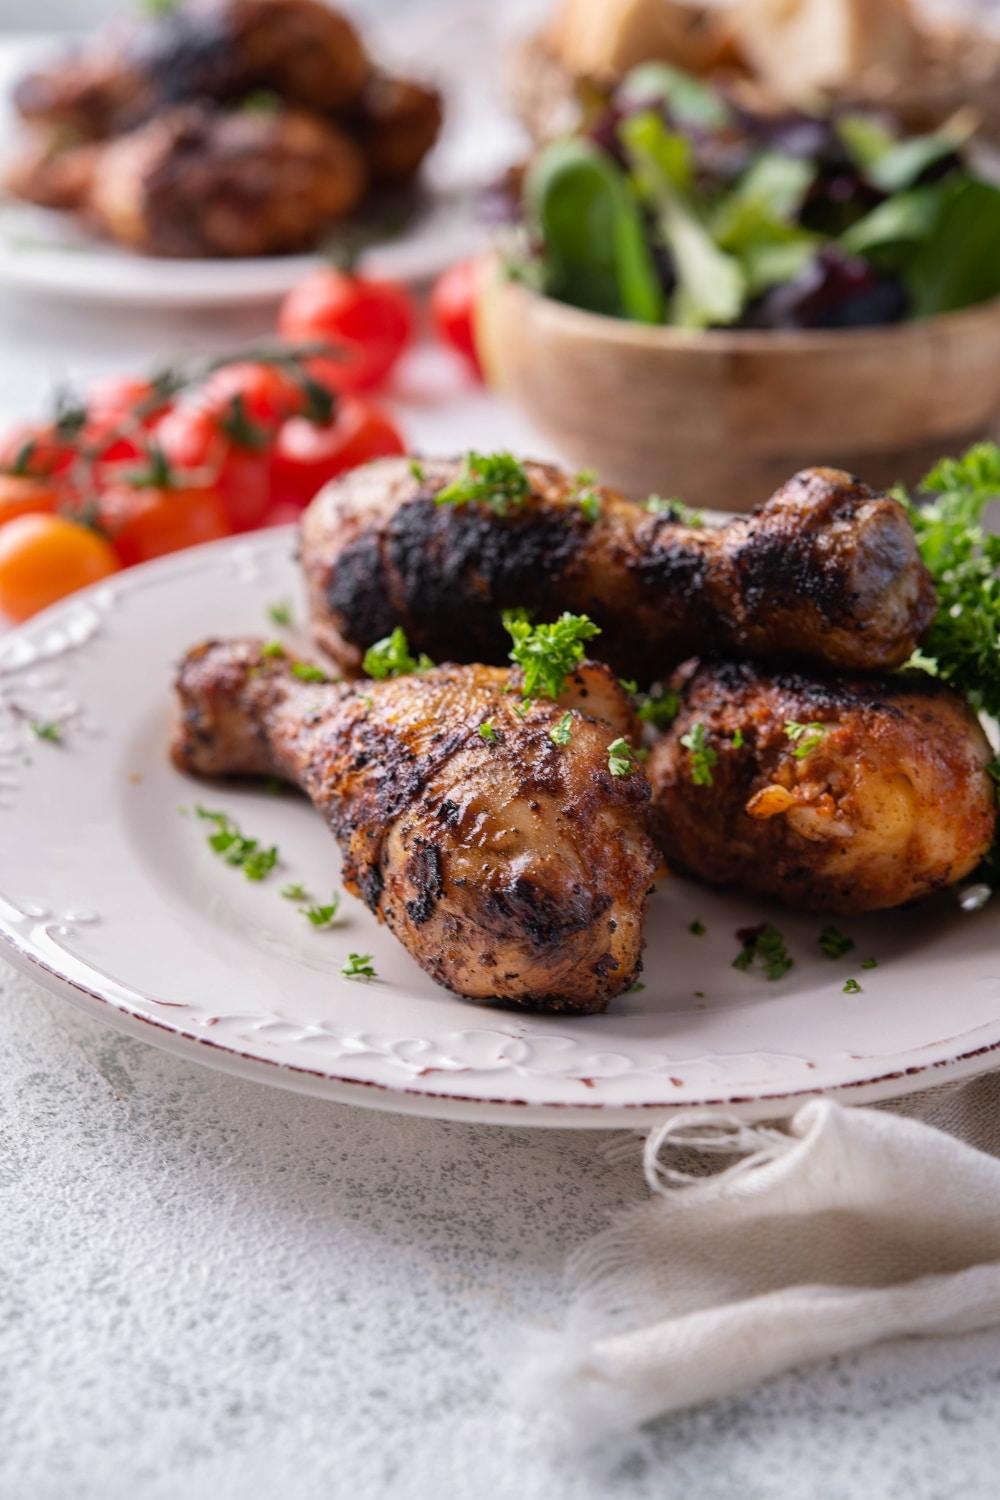 Three grilled chicken legs on a white plate, garnished with parsley. In the back is a bowl of salad, fresh cherry tomatoes, and another plate of grilled chicken legs.